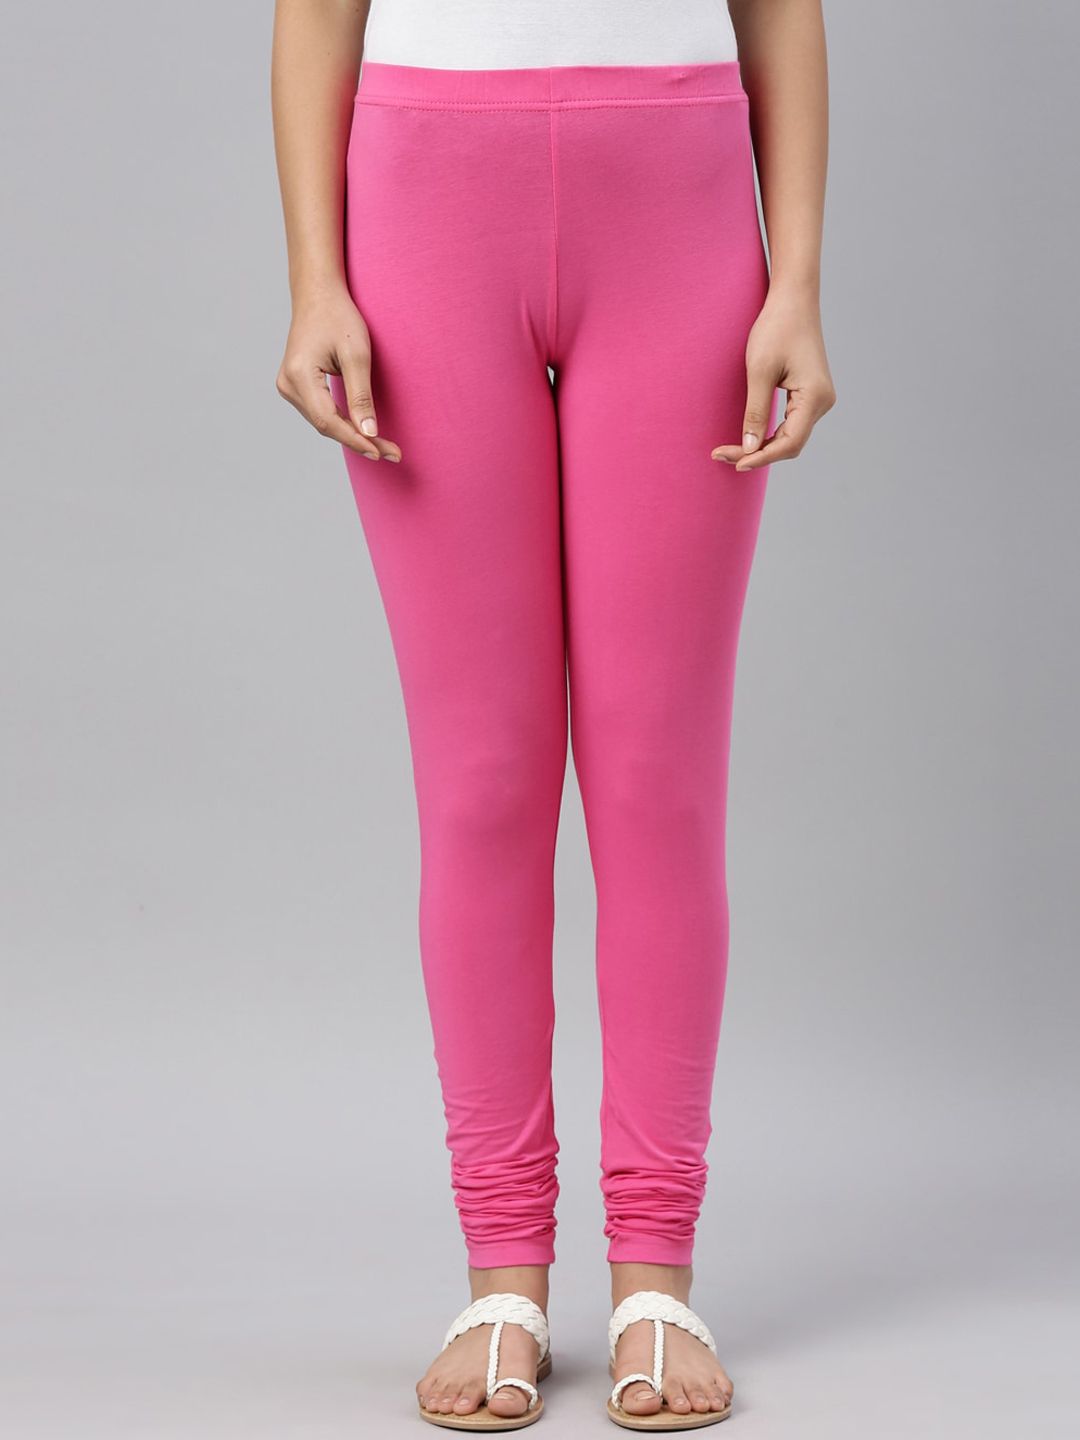 Go Colors Women Pink Solid Churidar-Length Cotton Leggings Price in India